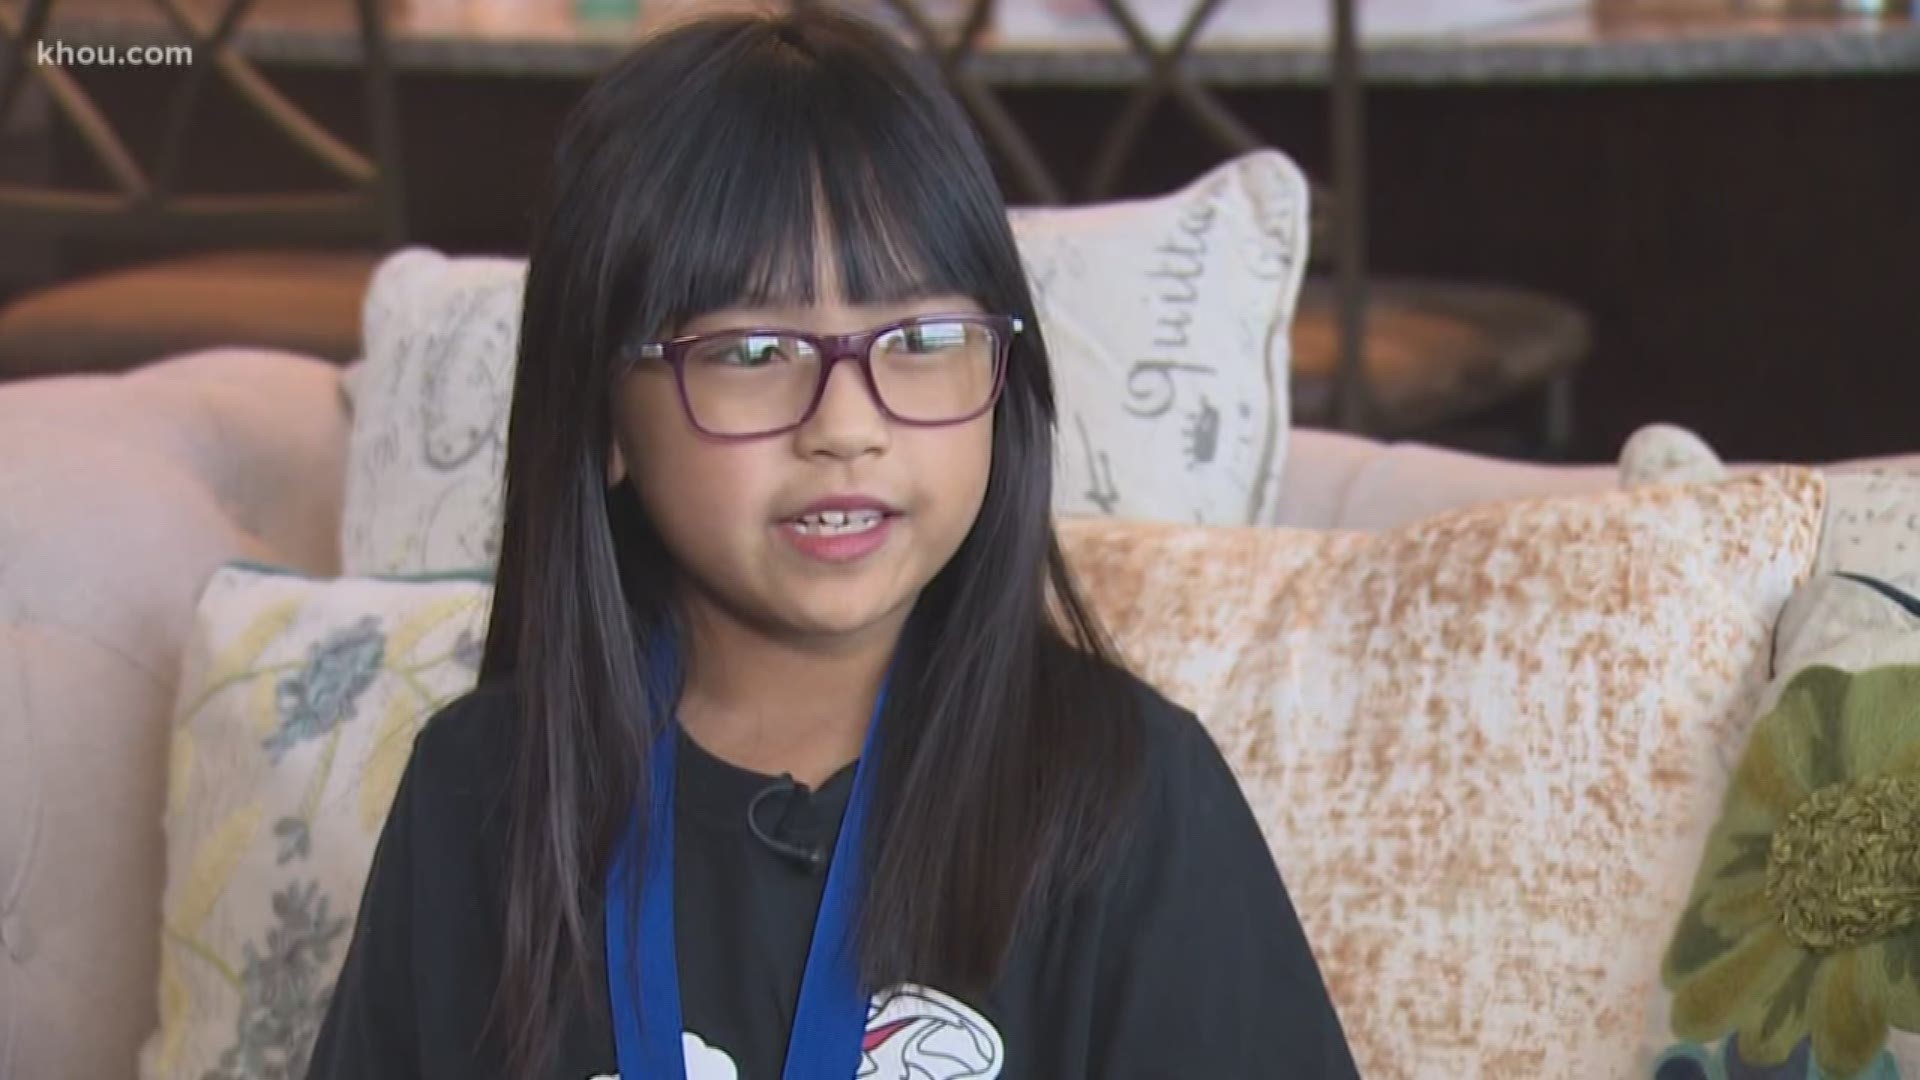 An adorable and vivacious 8-year-old girl from Richmond is causing quite the buzz after winning the National Spanish Spelling Bee Championship, even though Spanish is not her first language.